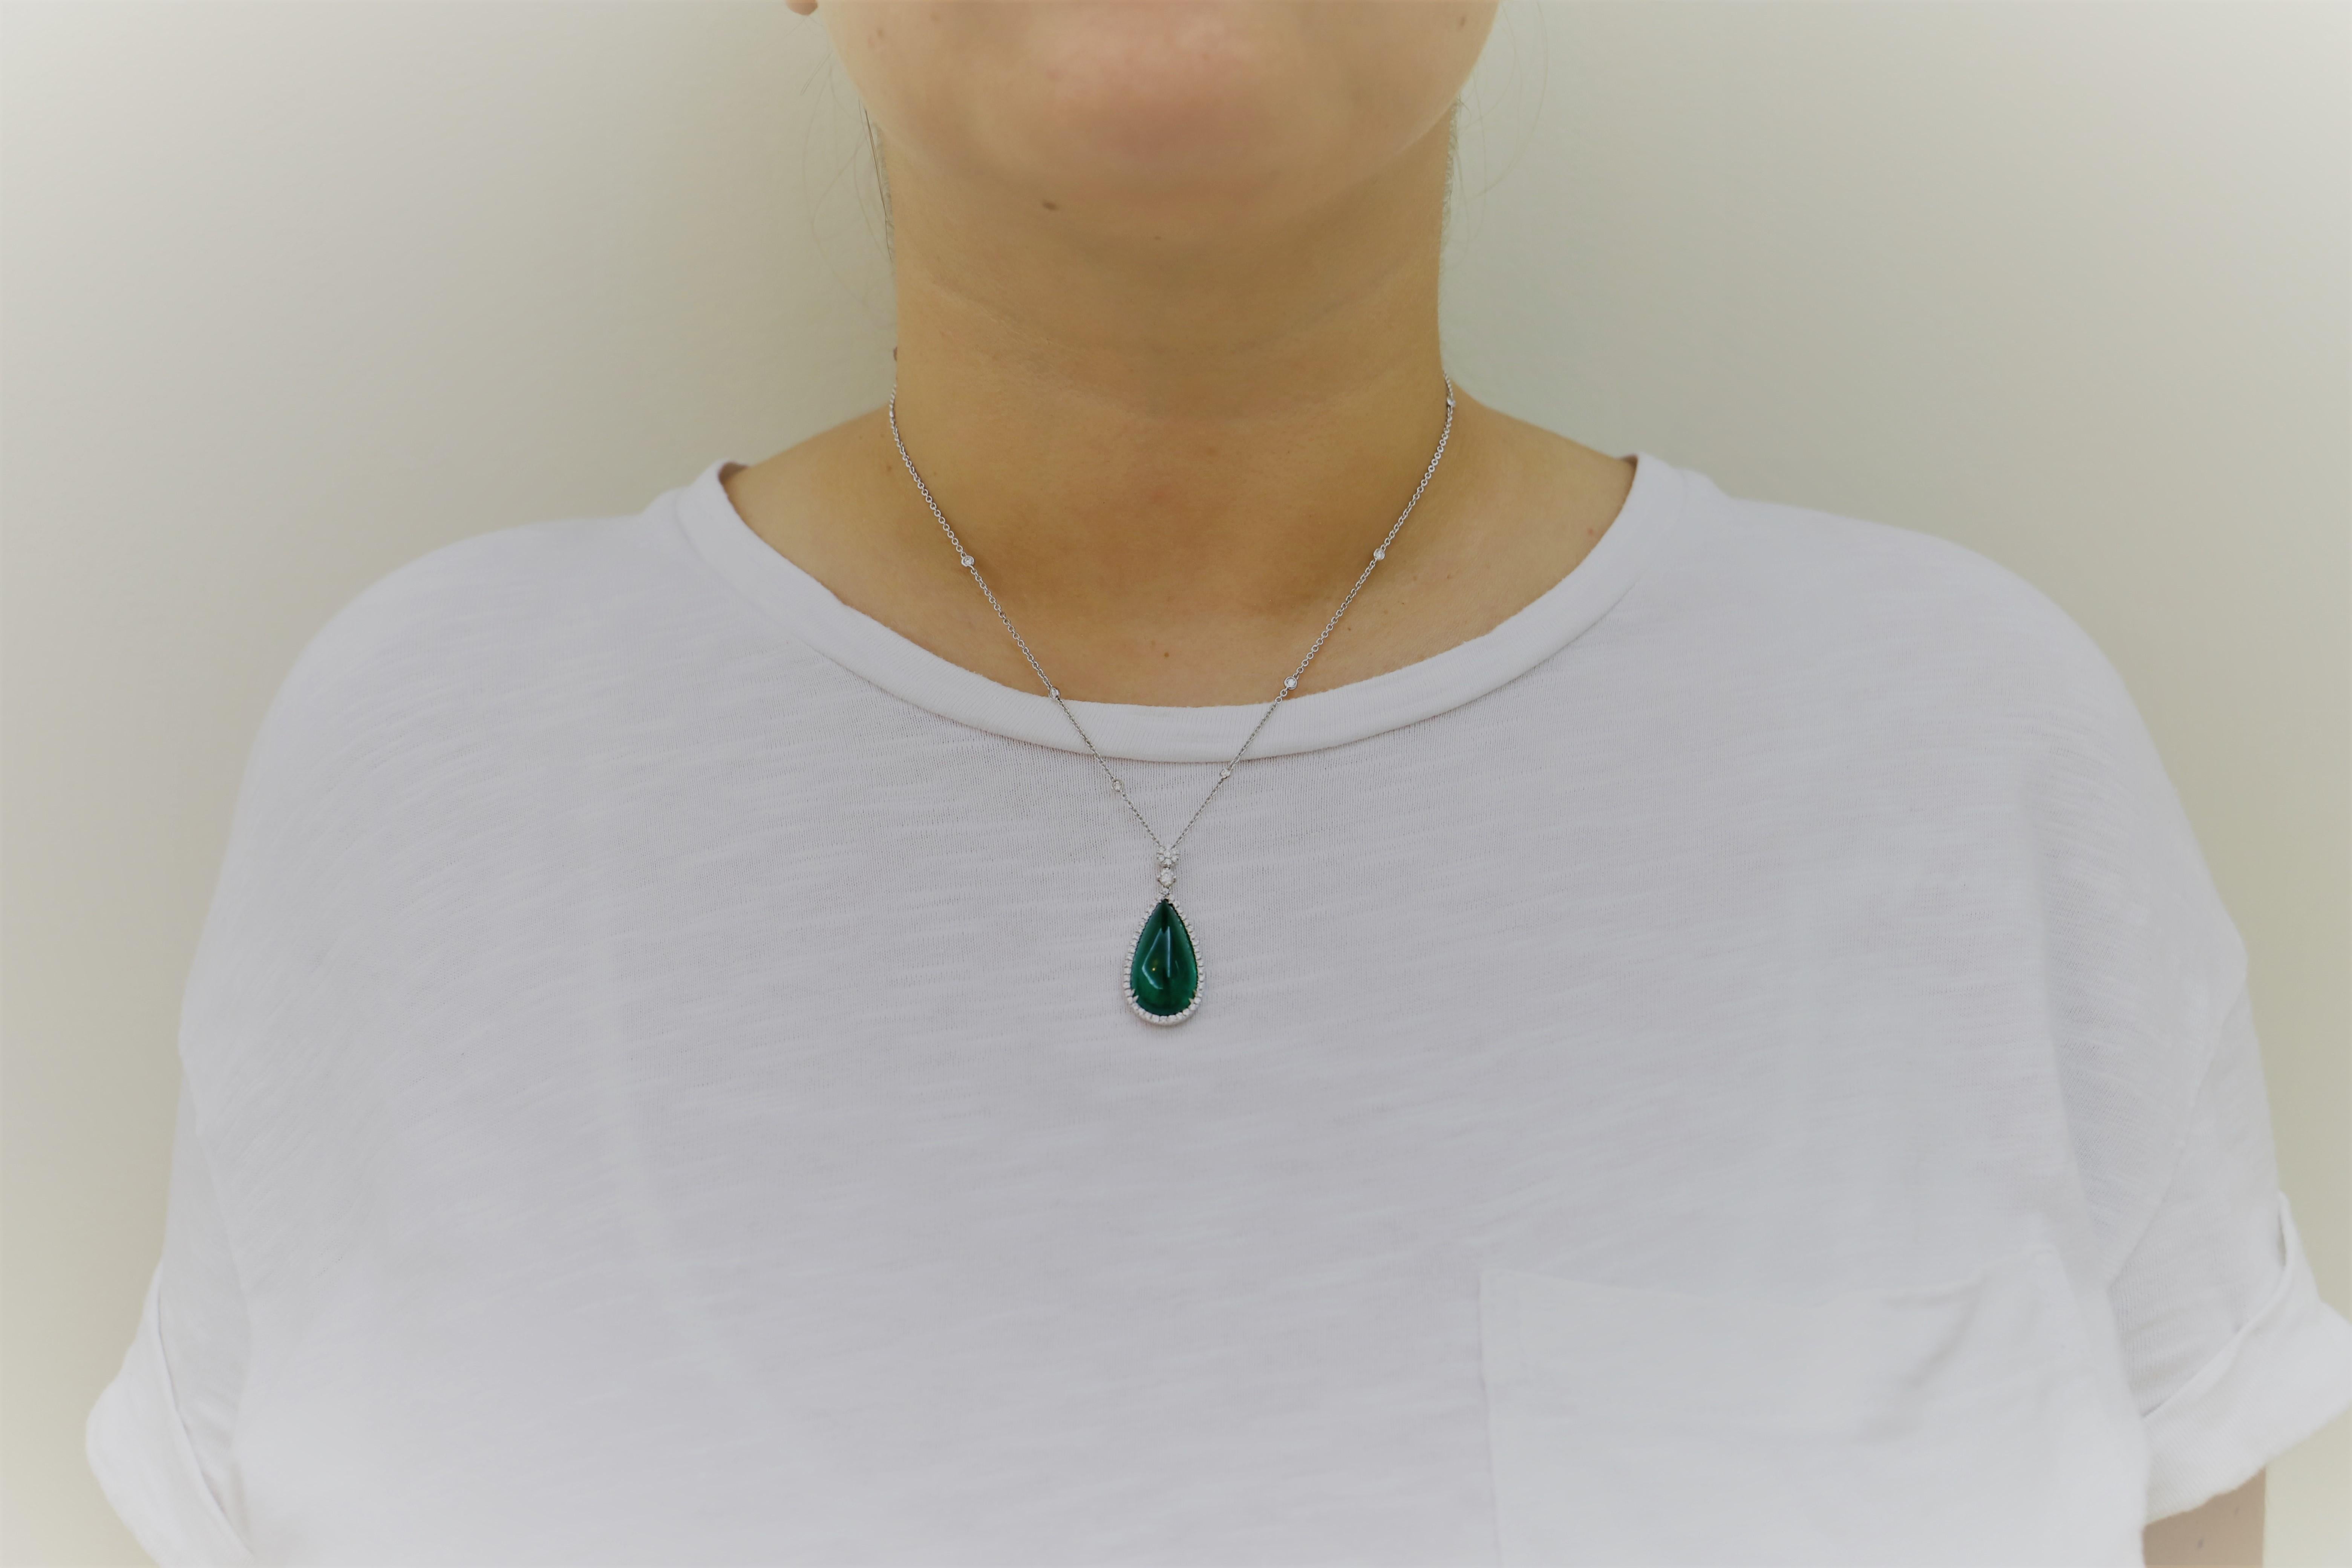 Elegant Pendant Necklaces composed  by 1 Pear Shape Emerald Cabouchon of 13.28 Carat, surrounded by White Diamonds. The Pendants is attached to a White Gold Necklace.
The Necklace has 10 White Diamonds, and it is 16 inches long-with an additional